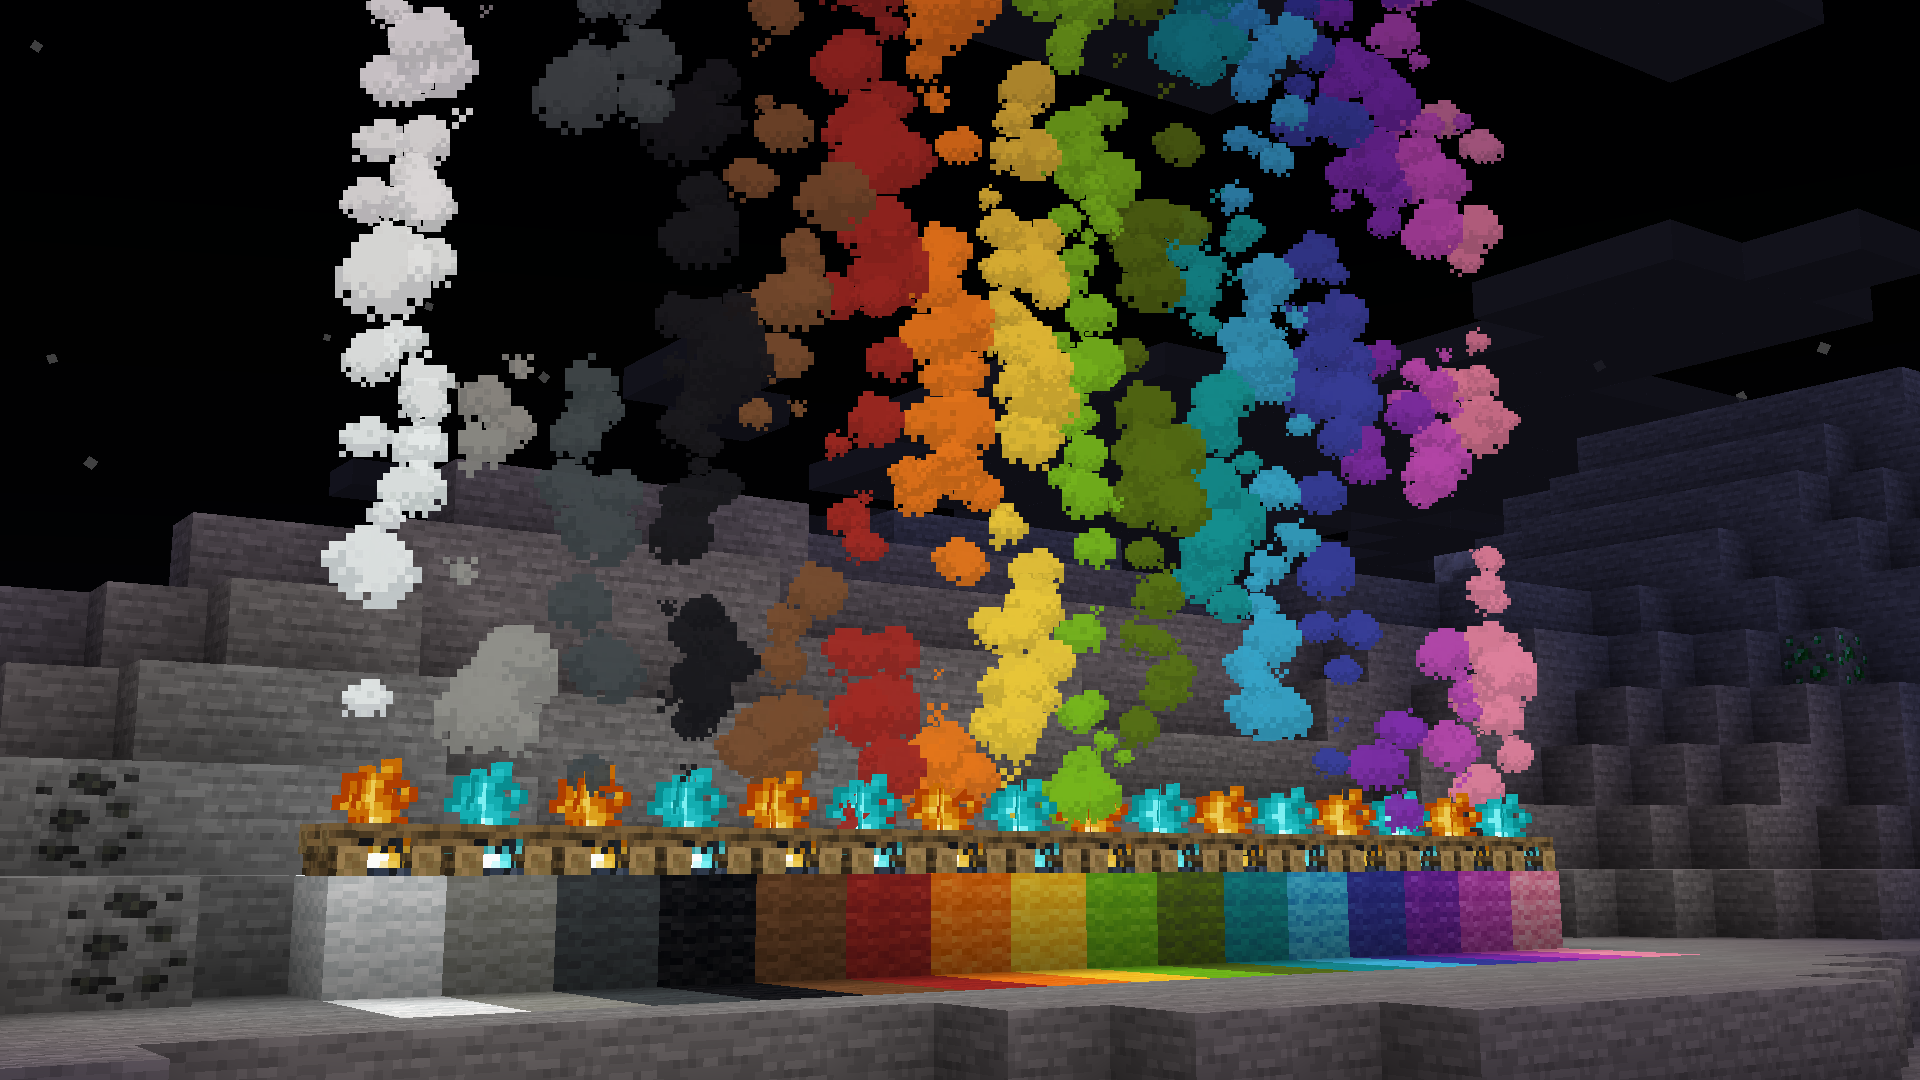 A comparison of all colored smoke particles, side by side, with their respective wool block